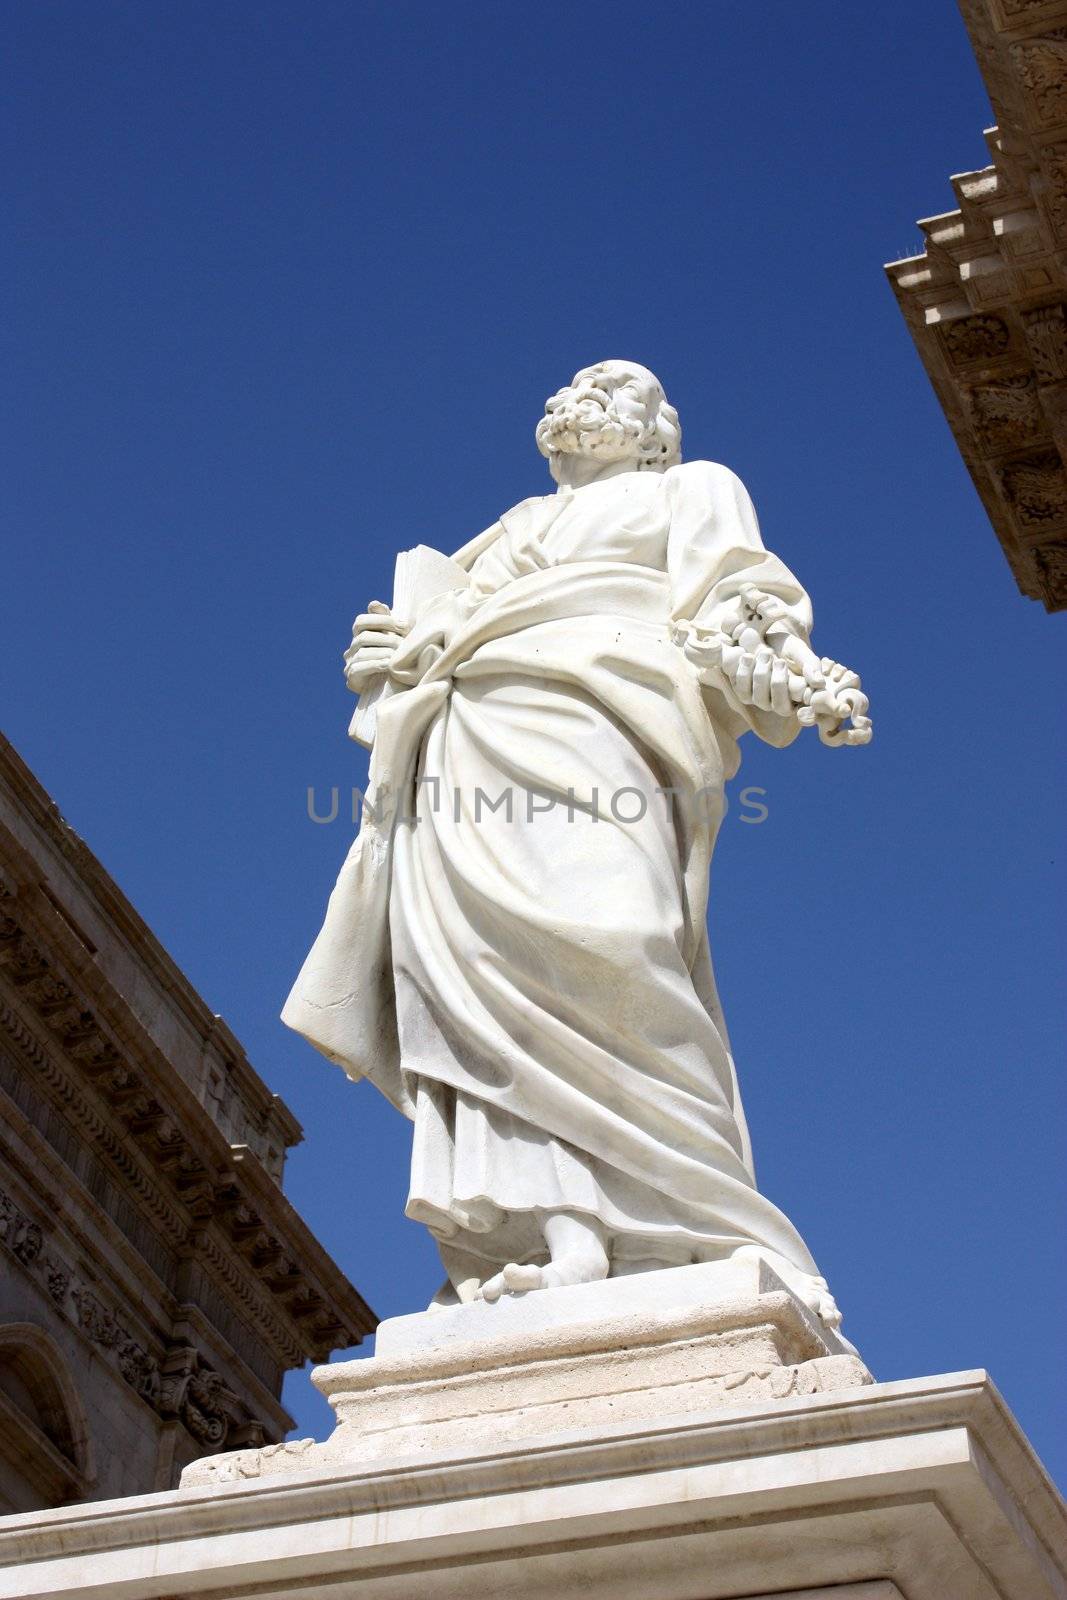 Saint Peter statue in Siracusa, Italy